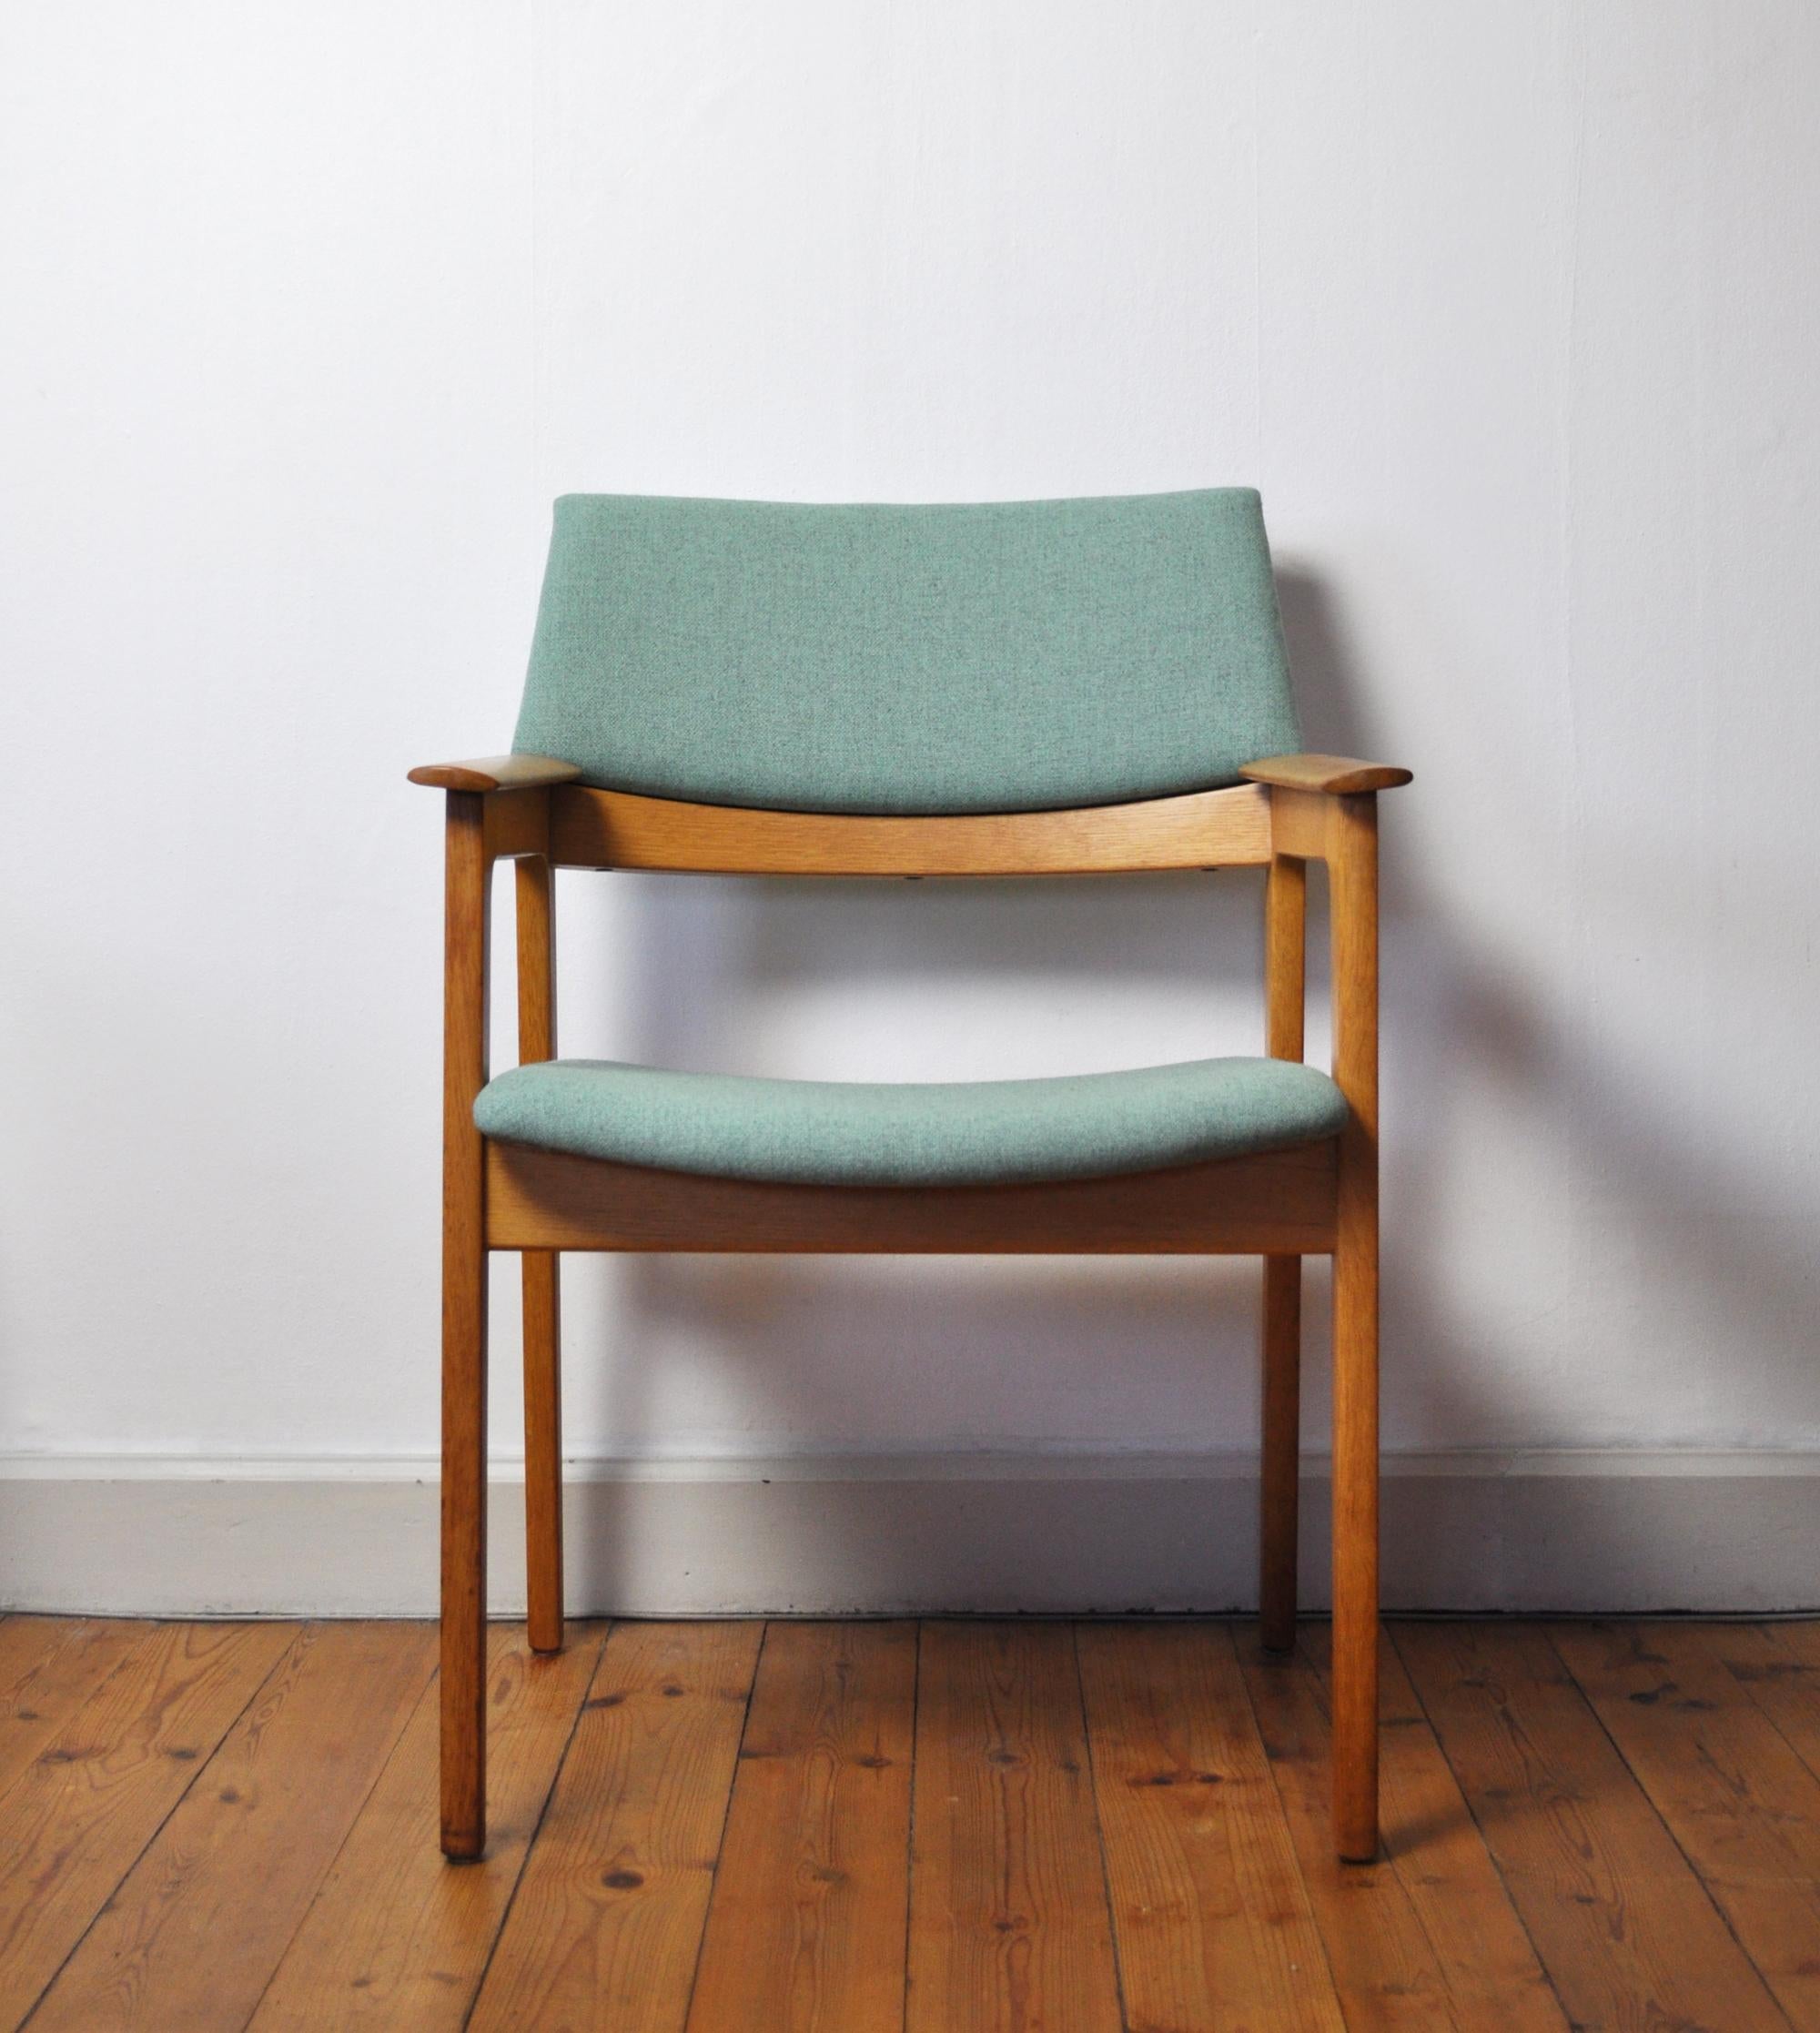 Danish armchair solid oak frame, backrest and seat with new upholstery Kvadrat Tonica 933. 
Nice vintage condition, frame with signs of wear consistent with age and use.

Dimensions: 
Height: 82 cm 
Width: 59 cm
Depth: 60 cm 
Seat height: 44 cm.